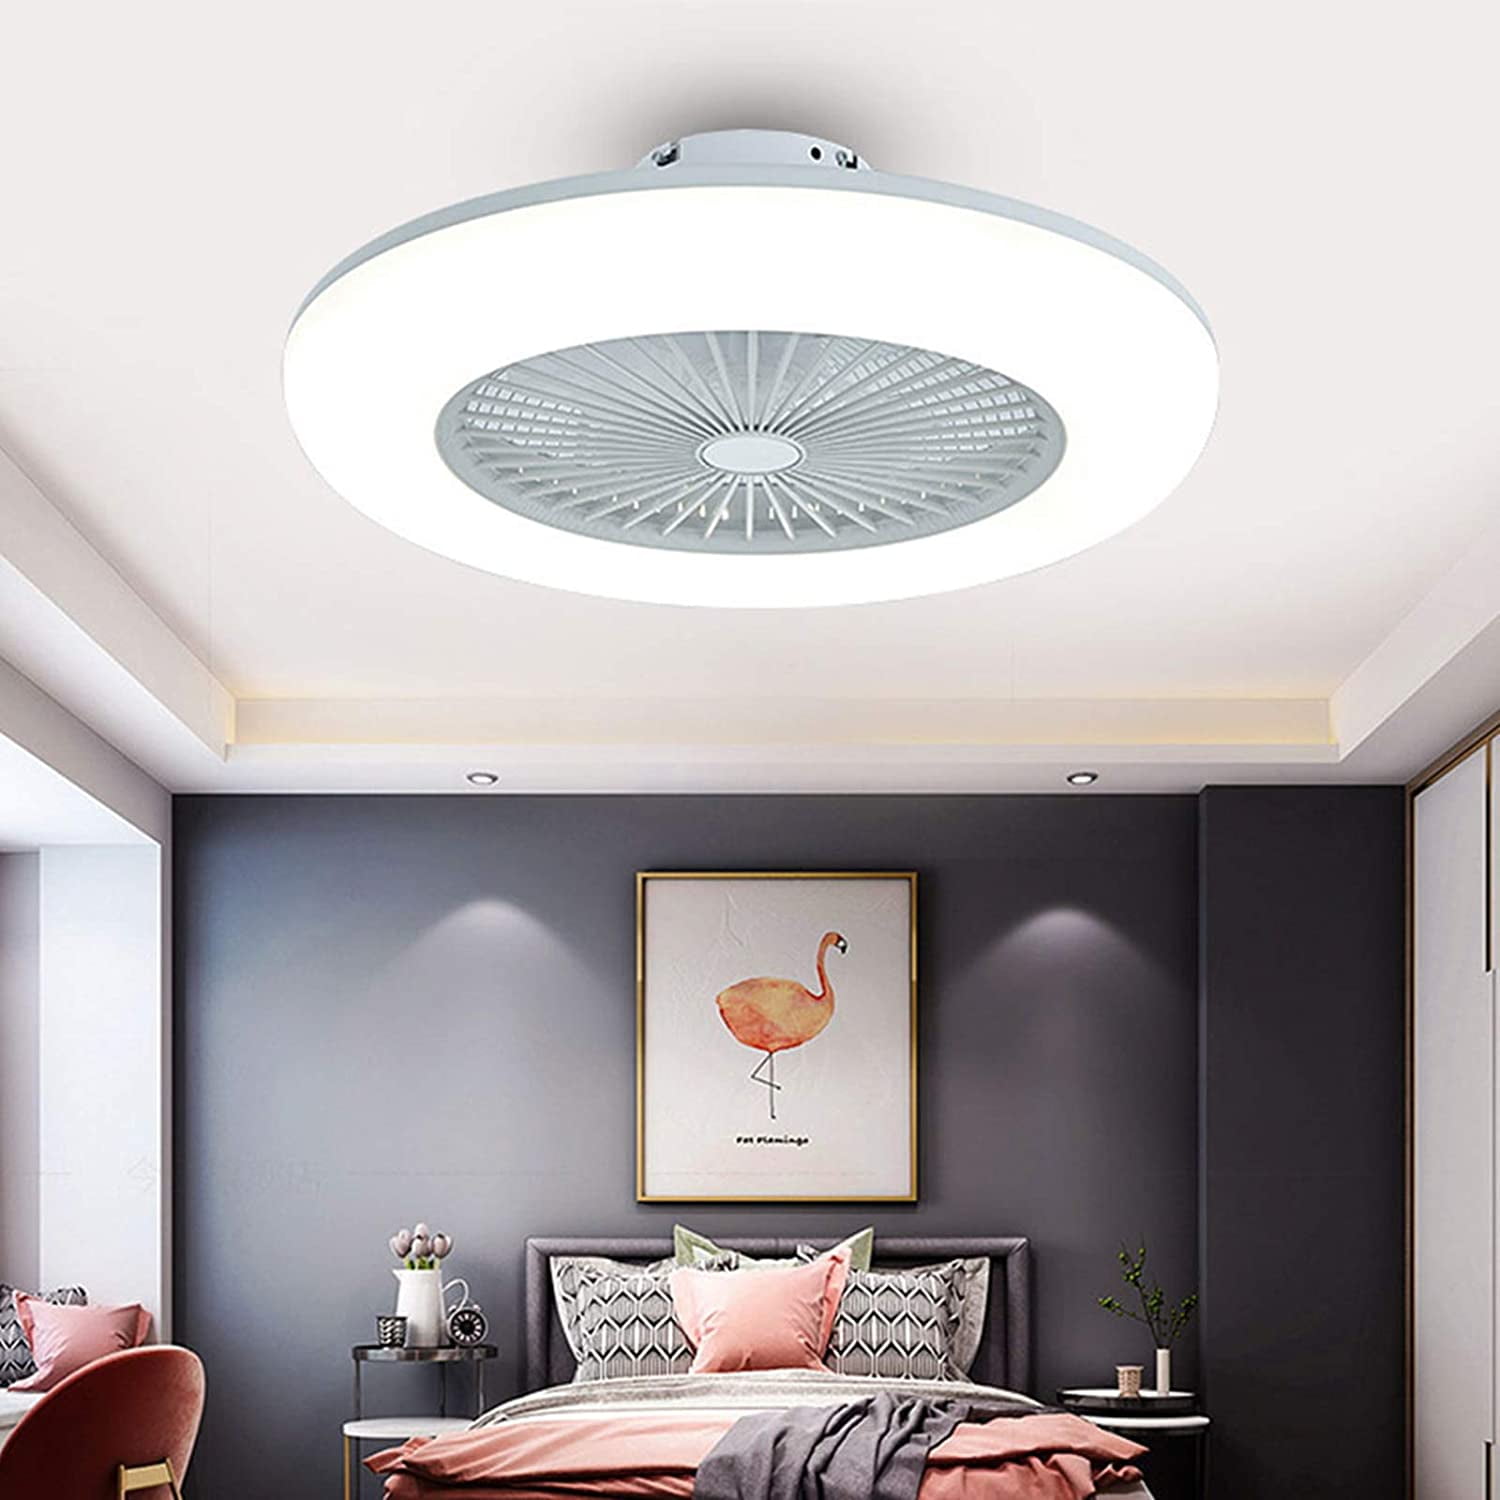 Ceiling Light LED with Lighting Fan Round Fan Creative Ceiling Lights Dimmable Three Colors Ceiling Fan Remote Control Indoor Kids Room Living Room Bedroom Decorative Lighting Ceiling Fan 